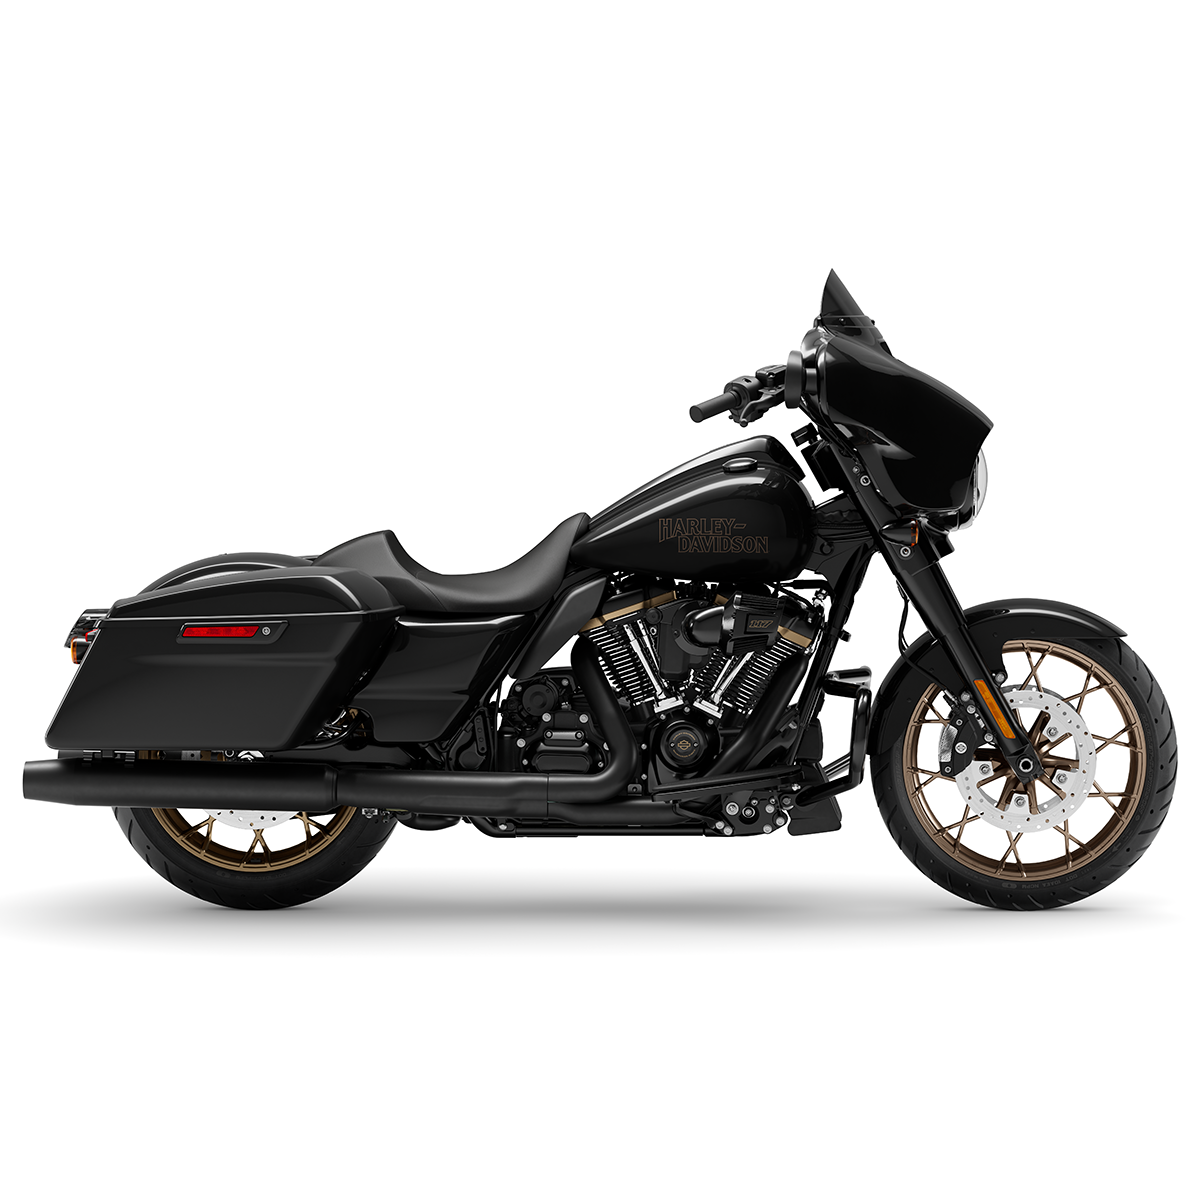 Looking for something a little different? Check out this 2010 Street Glide®  Trike with Custom Denim Black Patina Paint Job. Stop in for a… | Instagram